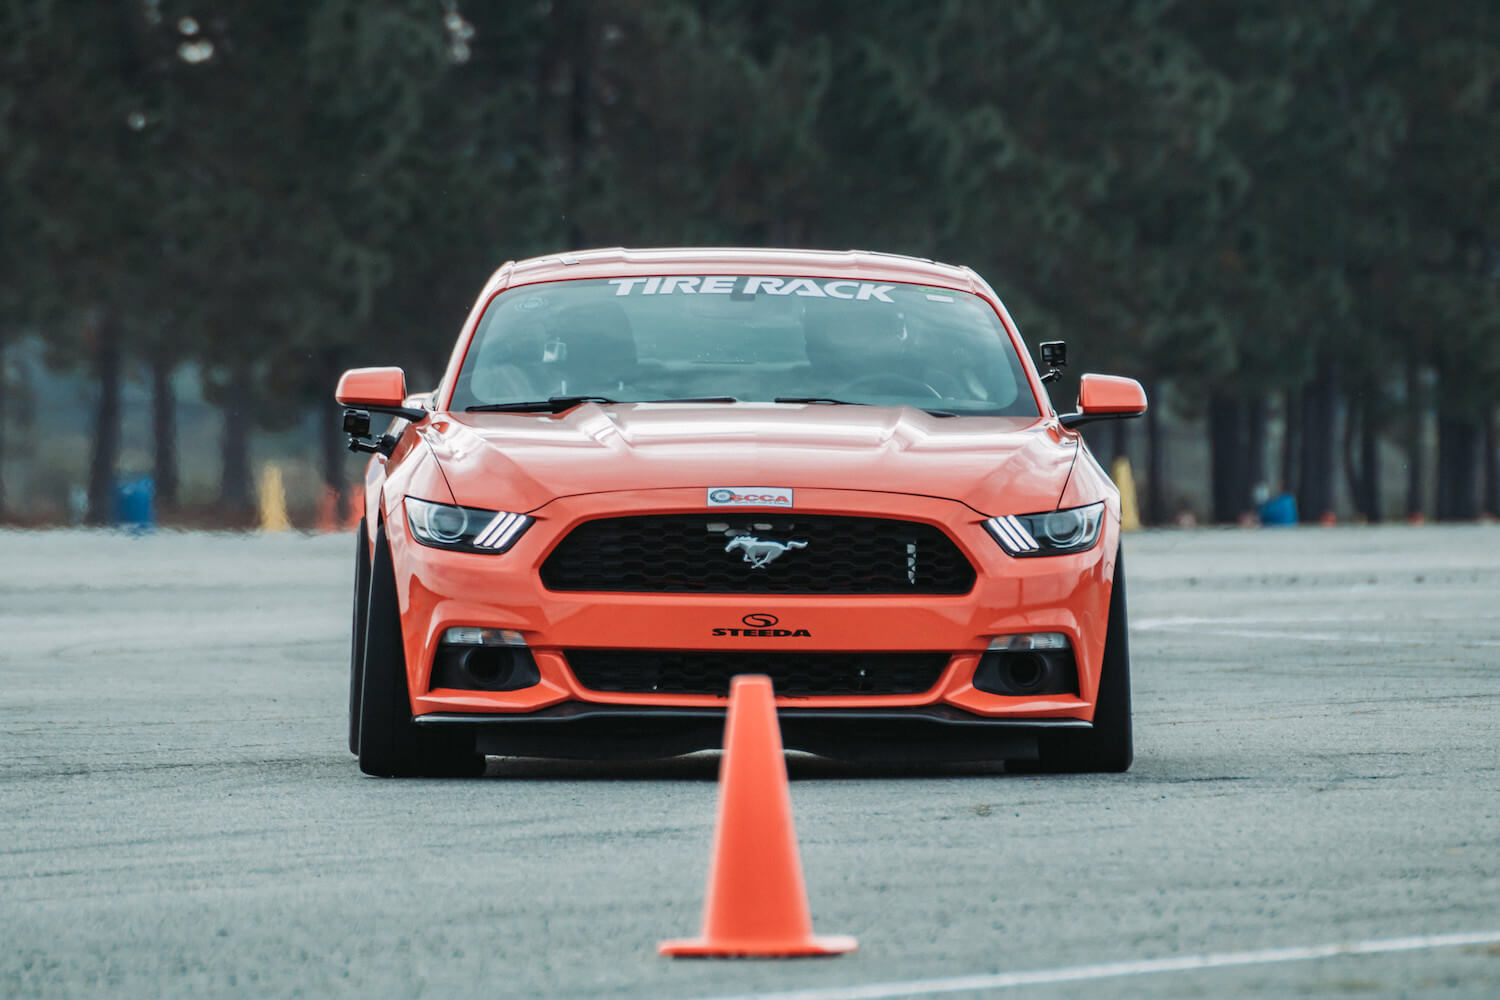 2015 Ford Mustang Steeda EcoBoost Autocross Car